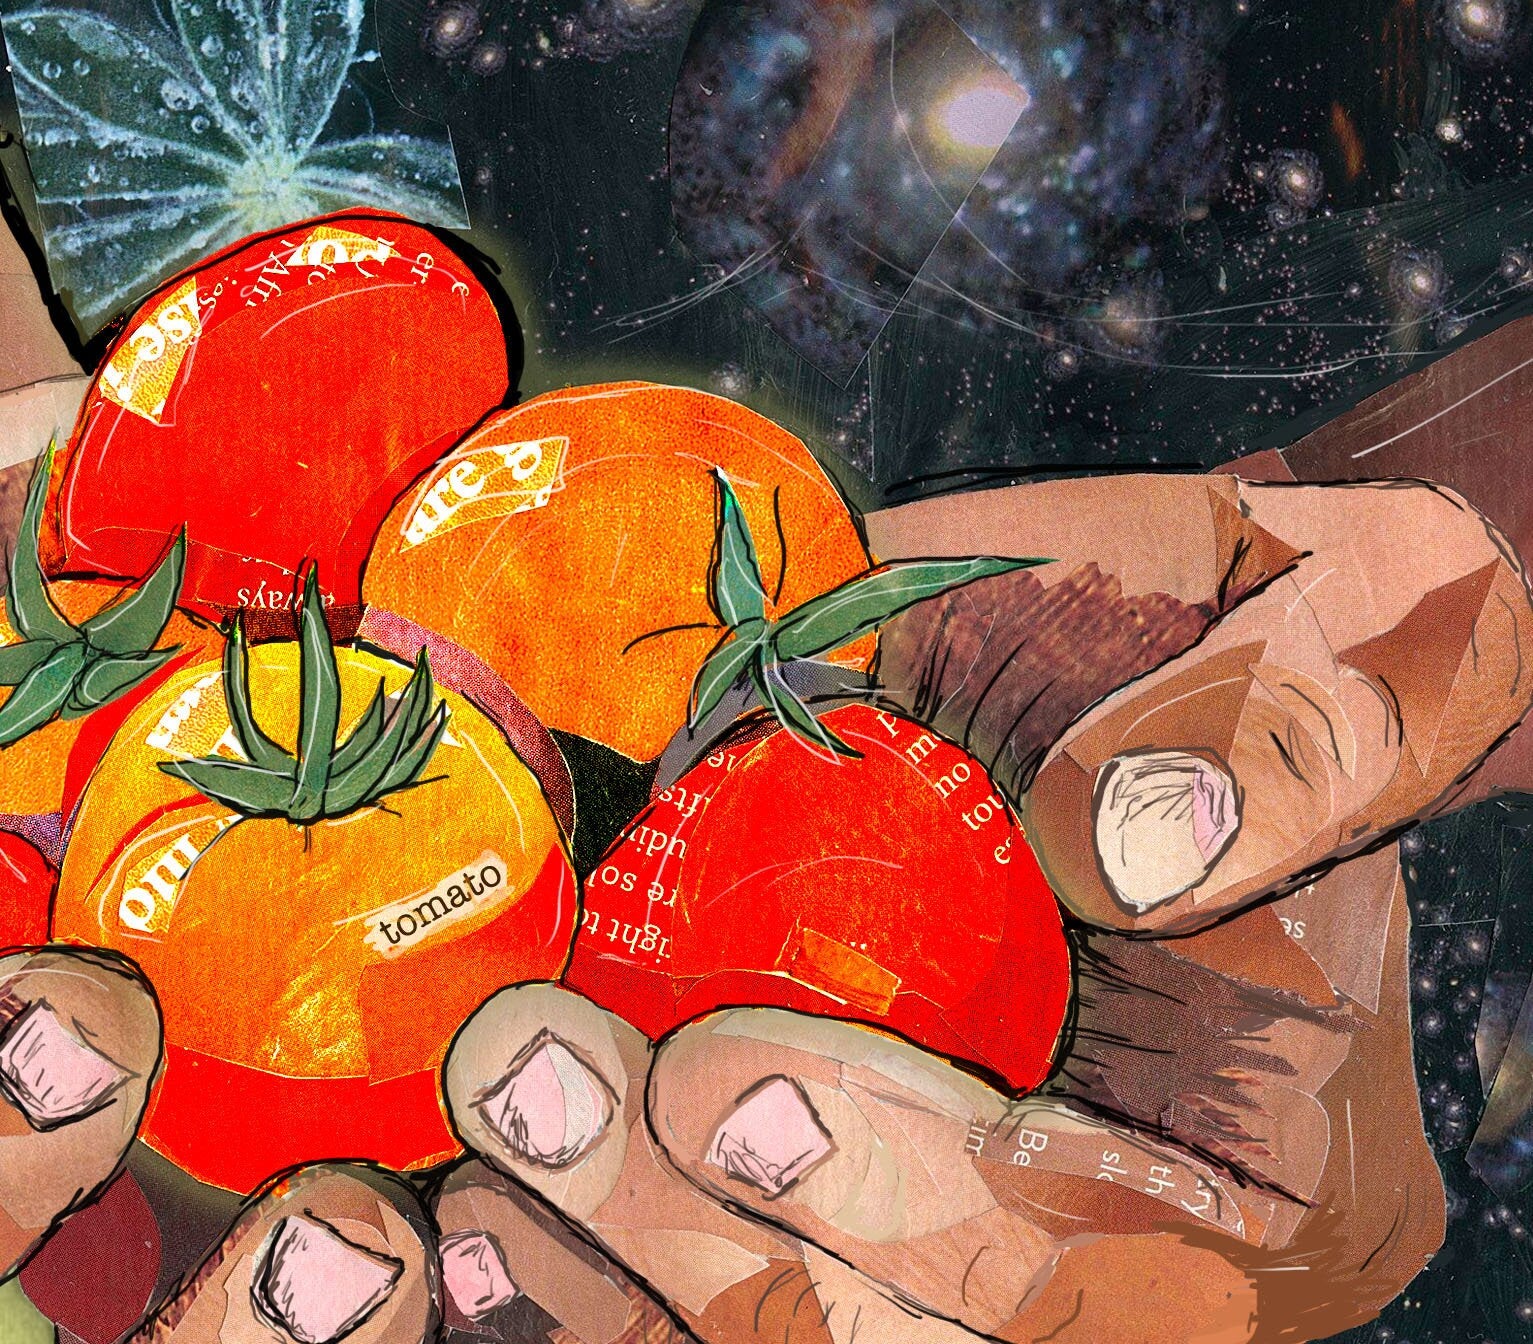 8x10 Art Print of a mixed media collage of hands holding tomatoes, garden, farming